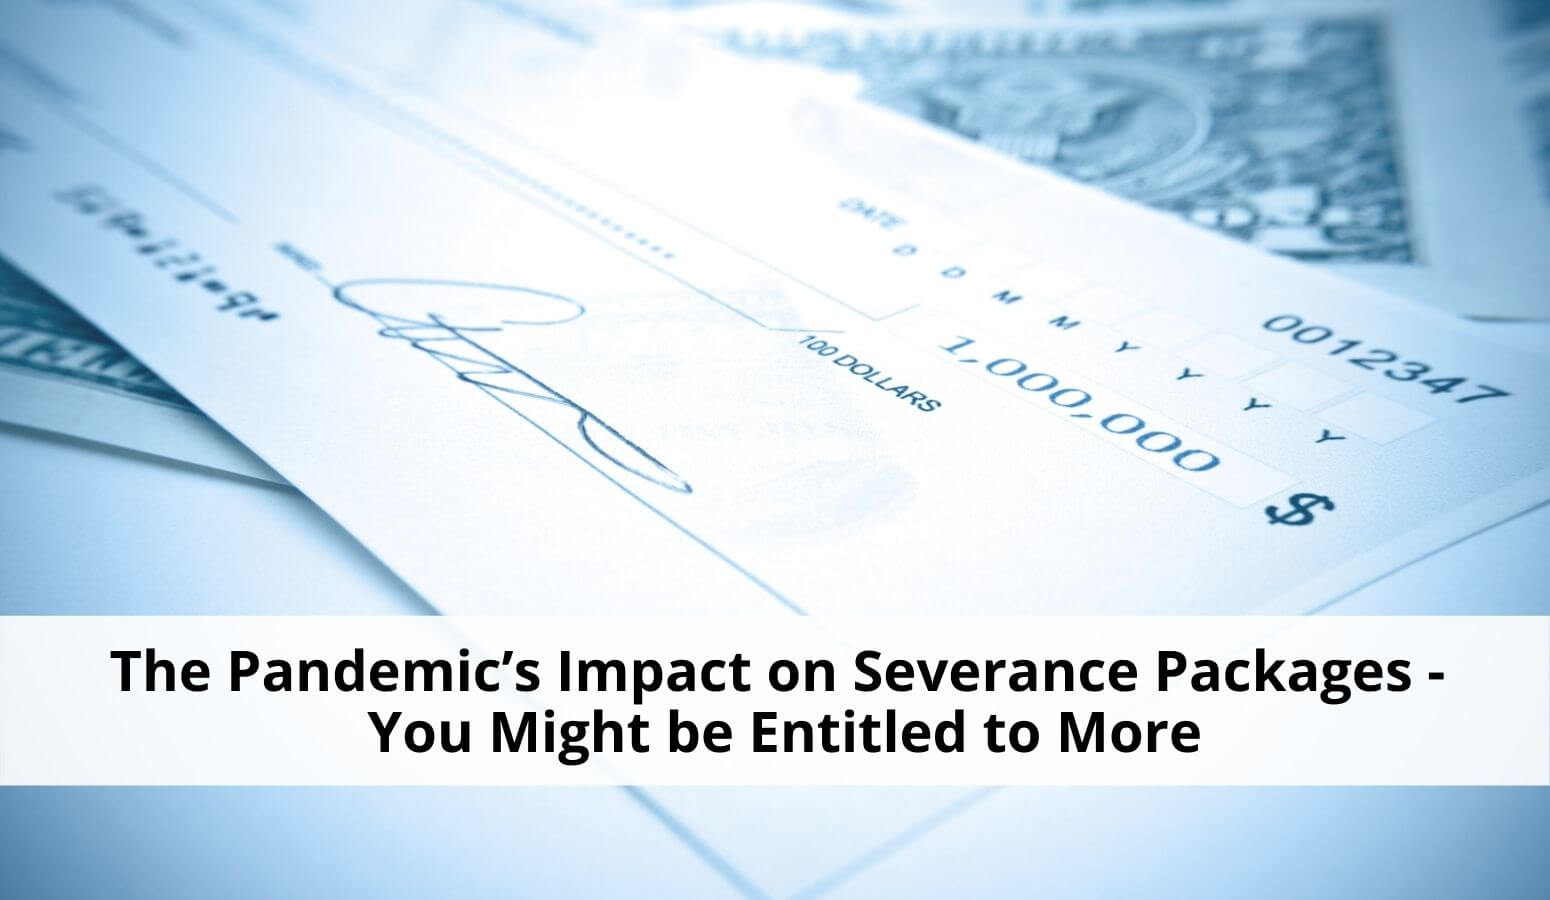 Pandemic's Impact on Severance Packages